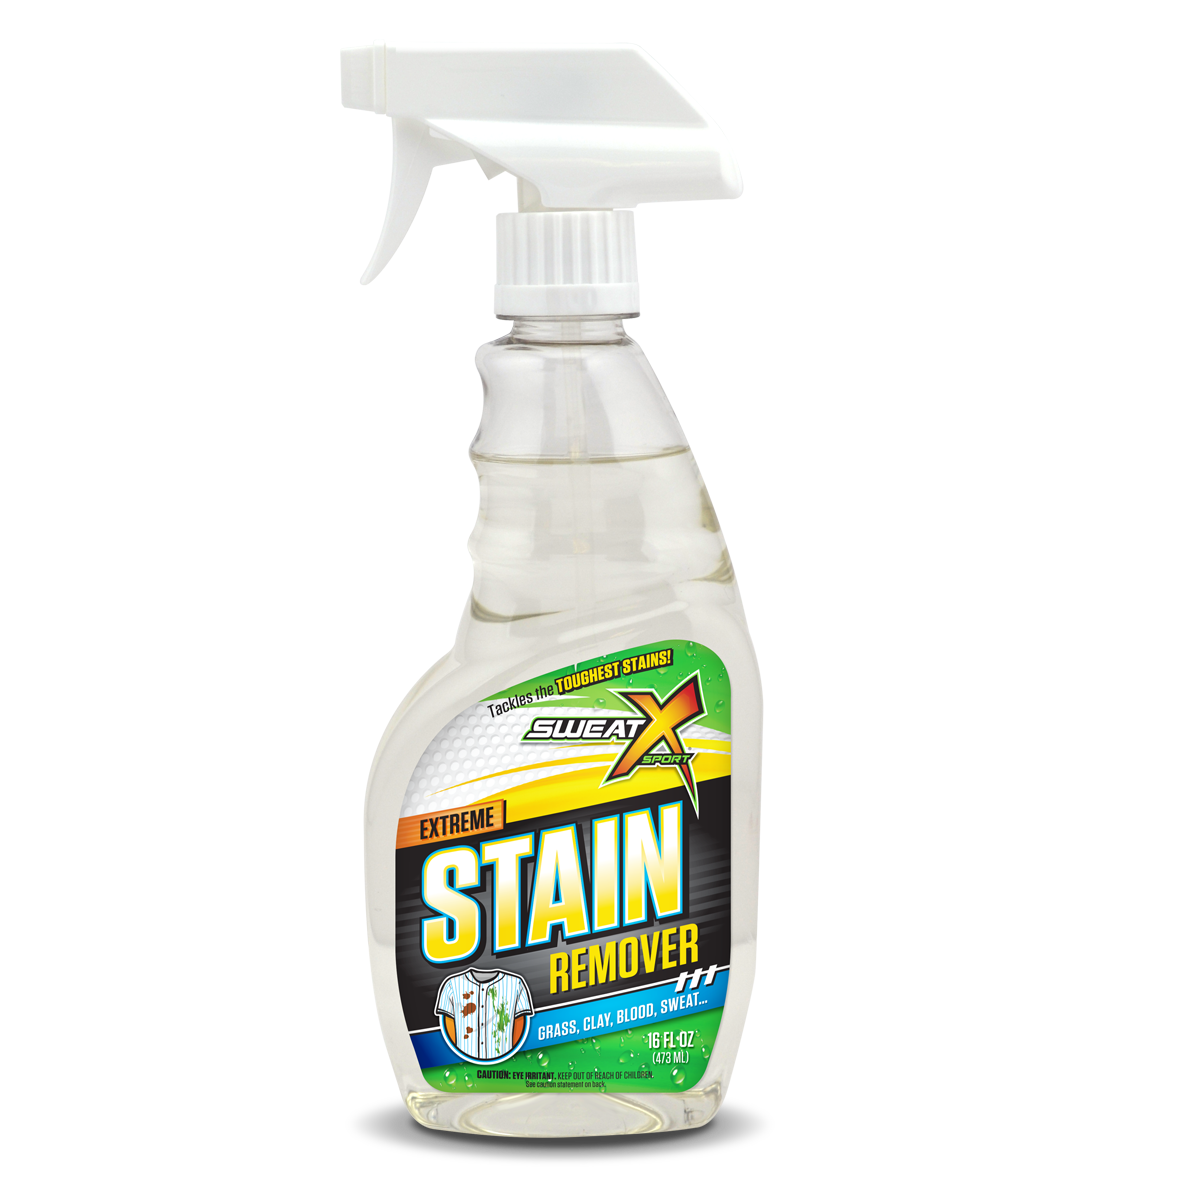 Tackle The Toughest Stains, Sweat X Extreme Stain Remover Spray 16 oz